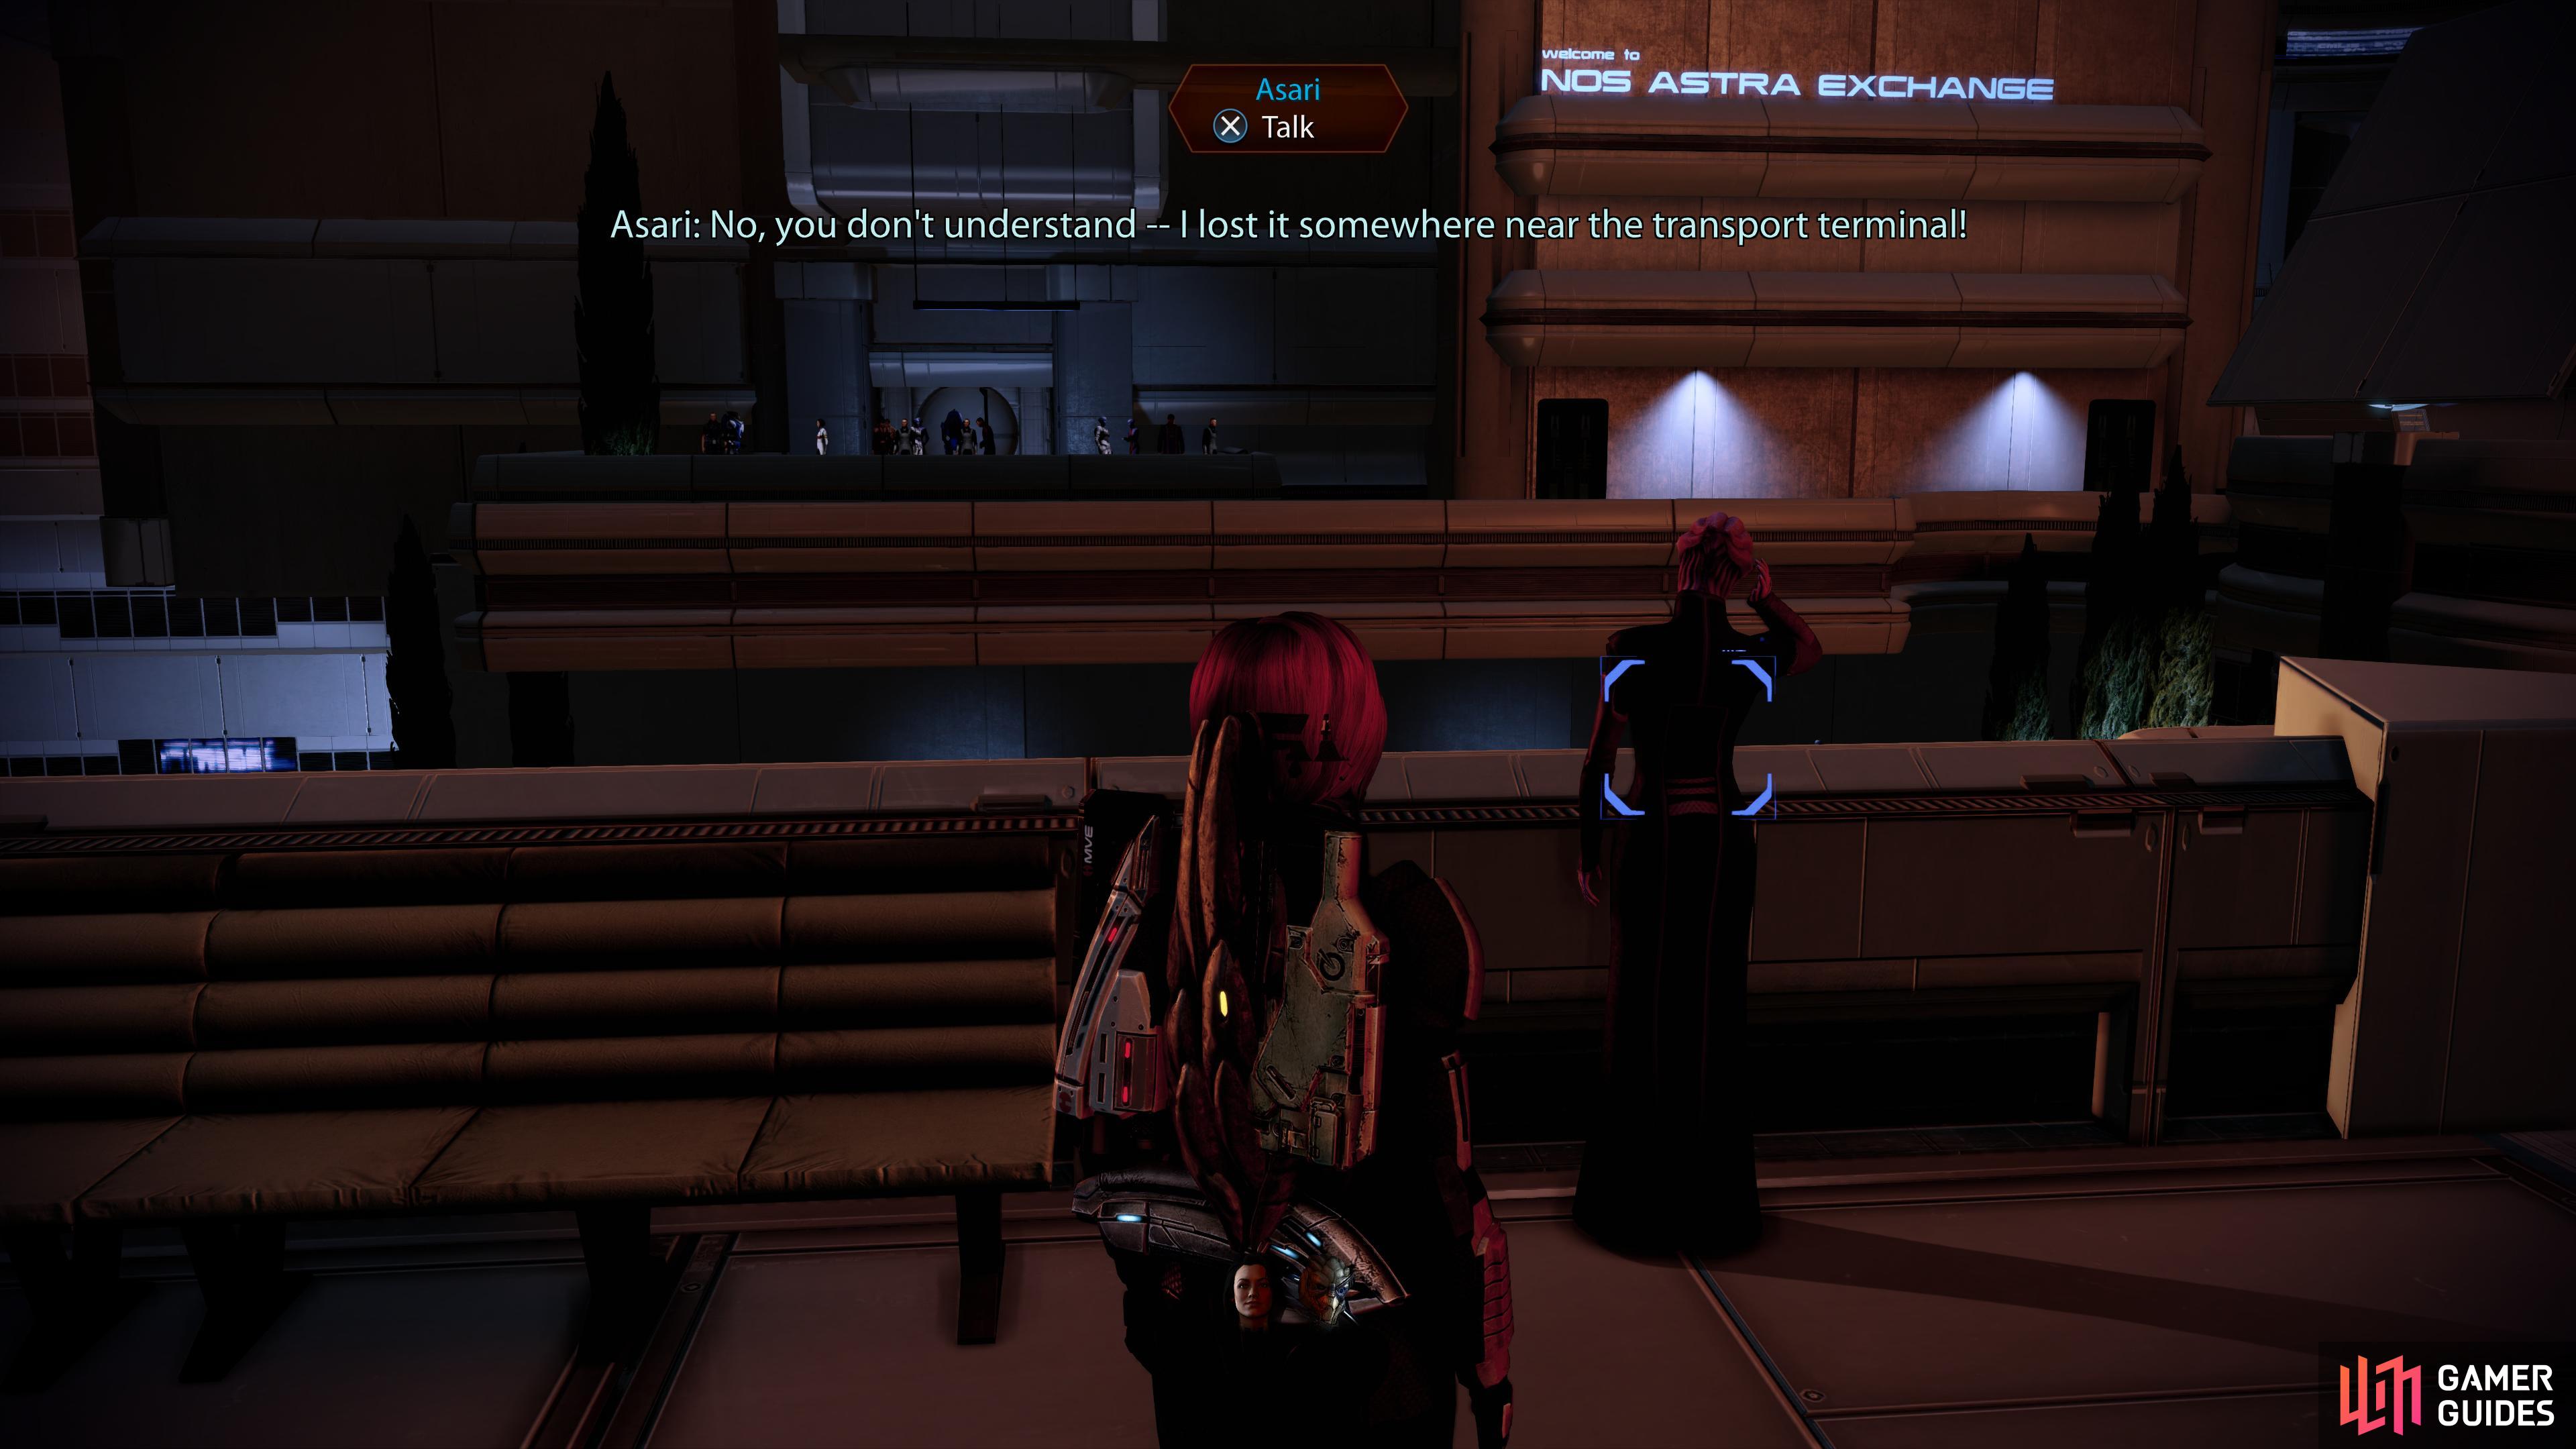 If you've acquired Miranda's loyalty mission, you can overhear an asari complaining about a missing trinket.